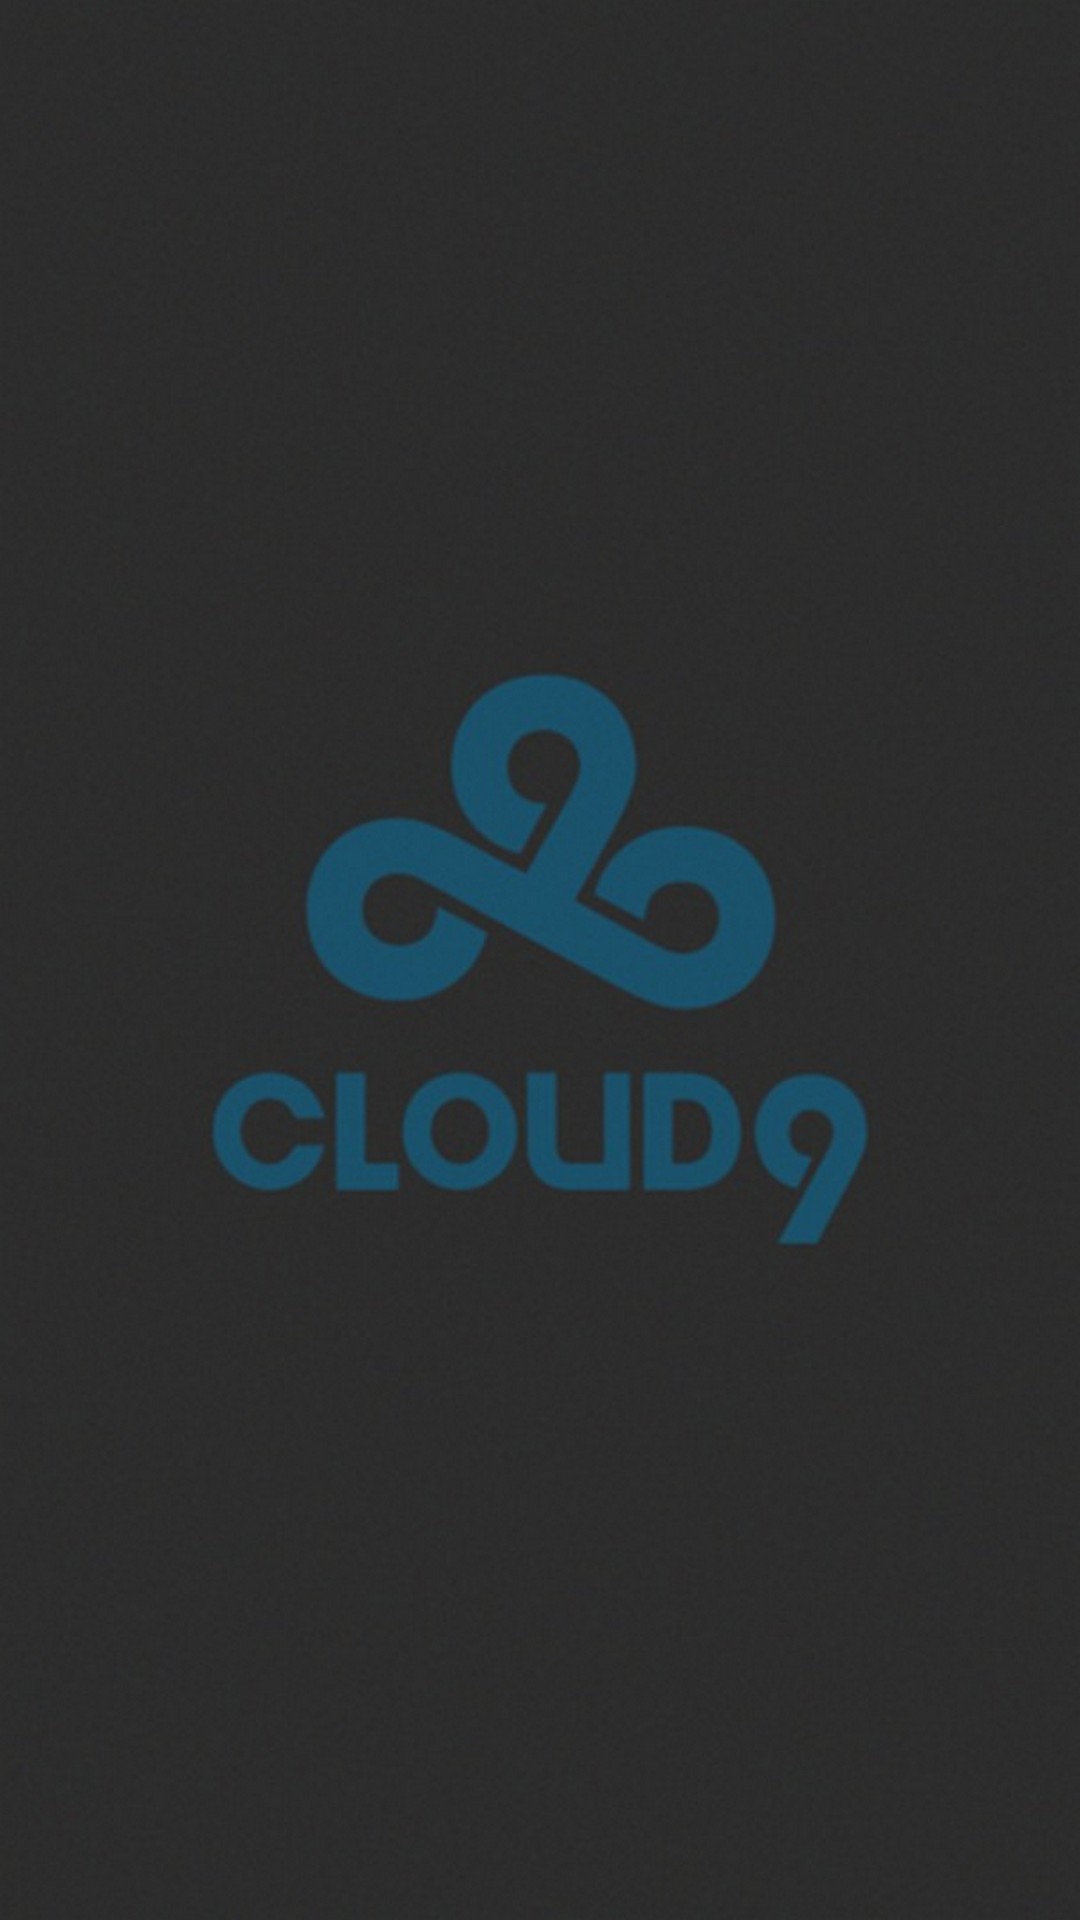 Android Wallpaper Cloud 9 Games with HD resolution 1080x1920